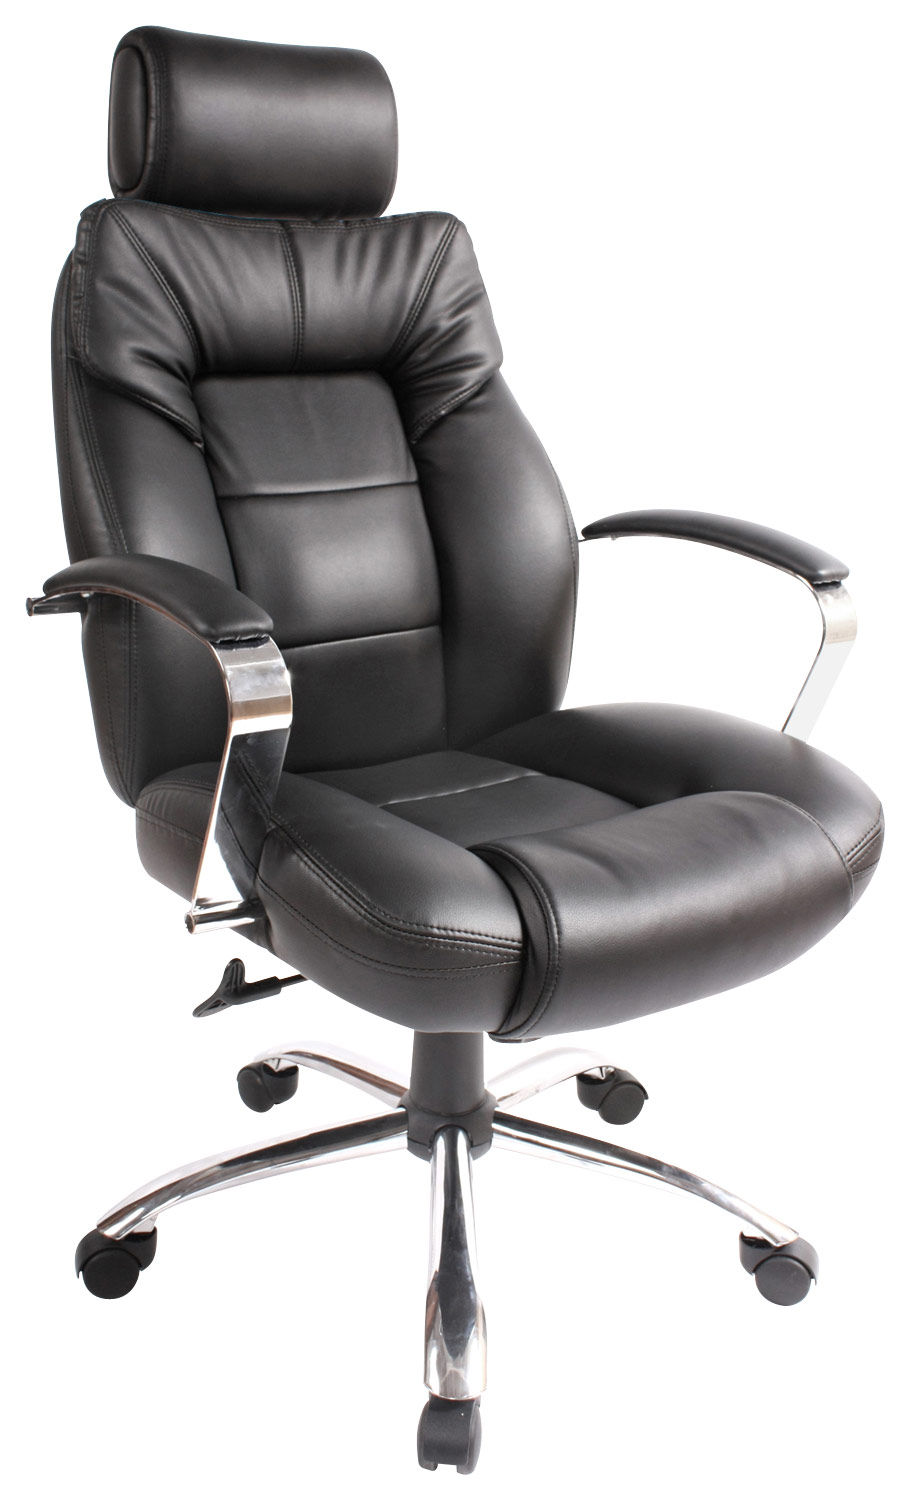 Comfort Products Inc. - Commodore II Big & Tall Leather Executive Chair - Black was $328.99 now $253.99 (23.0% off)